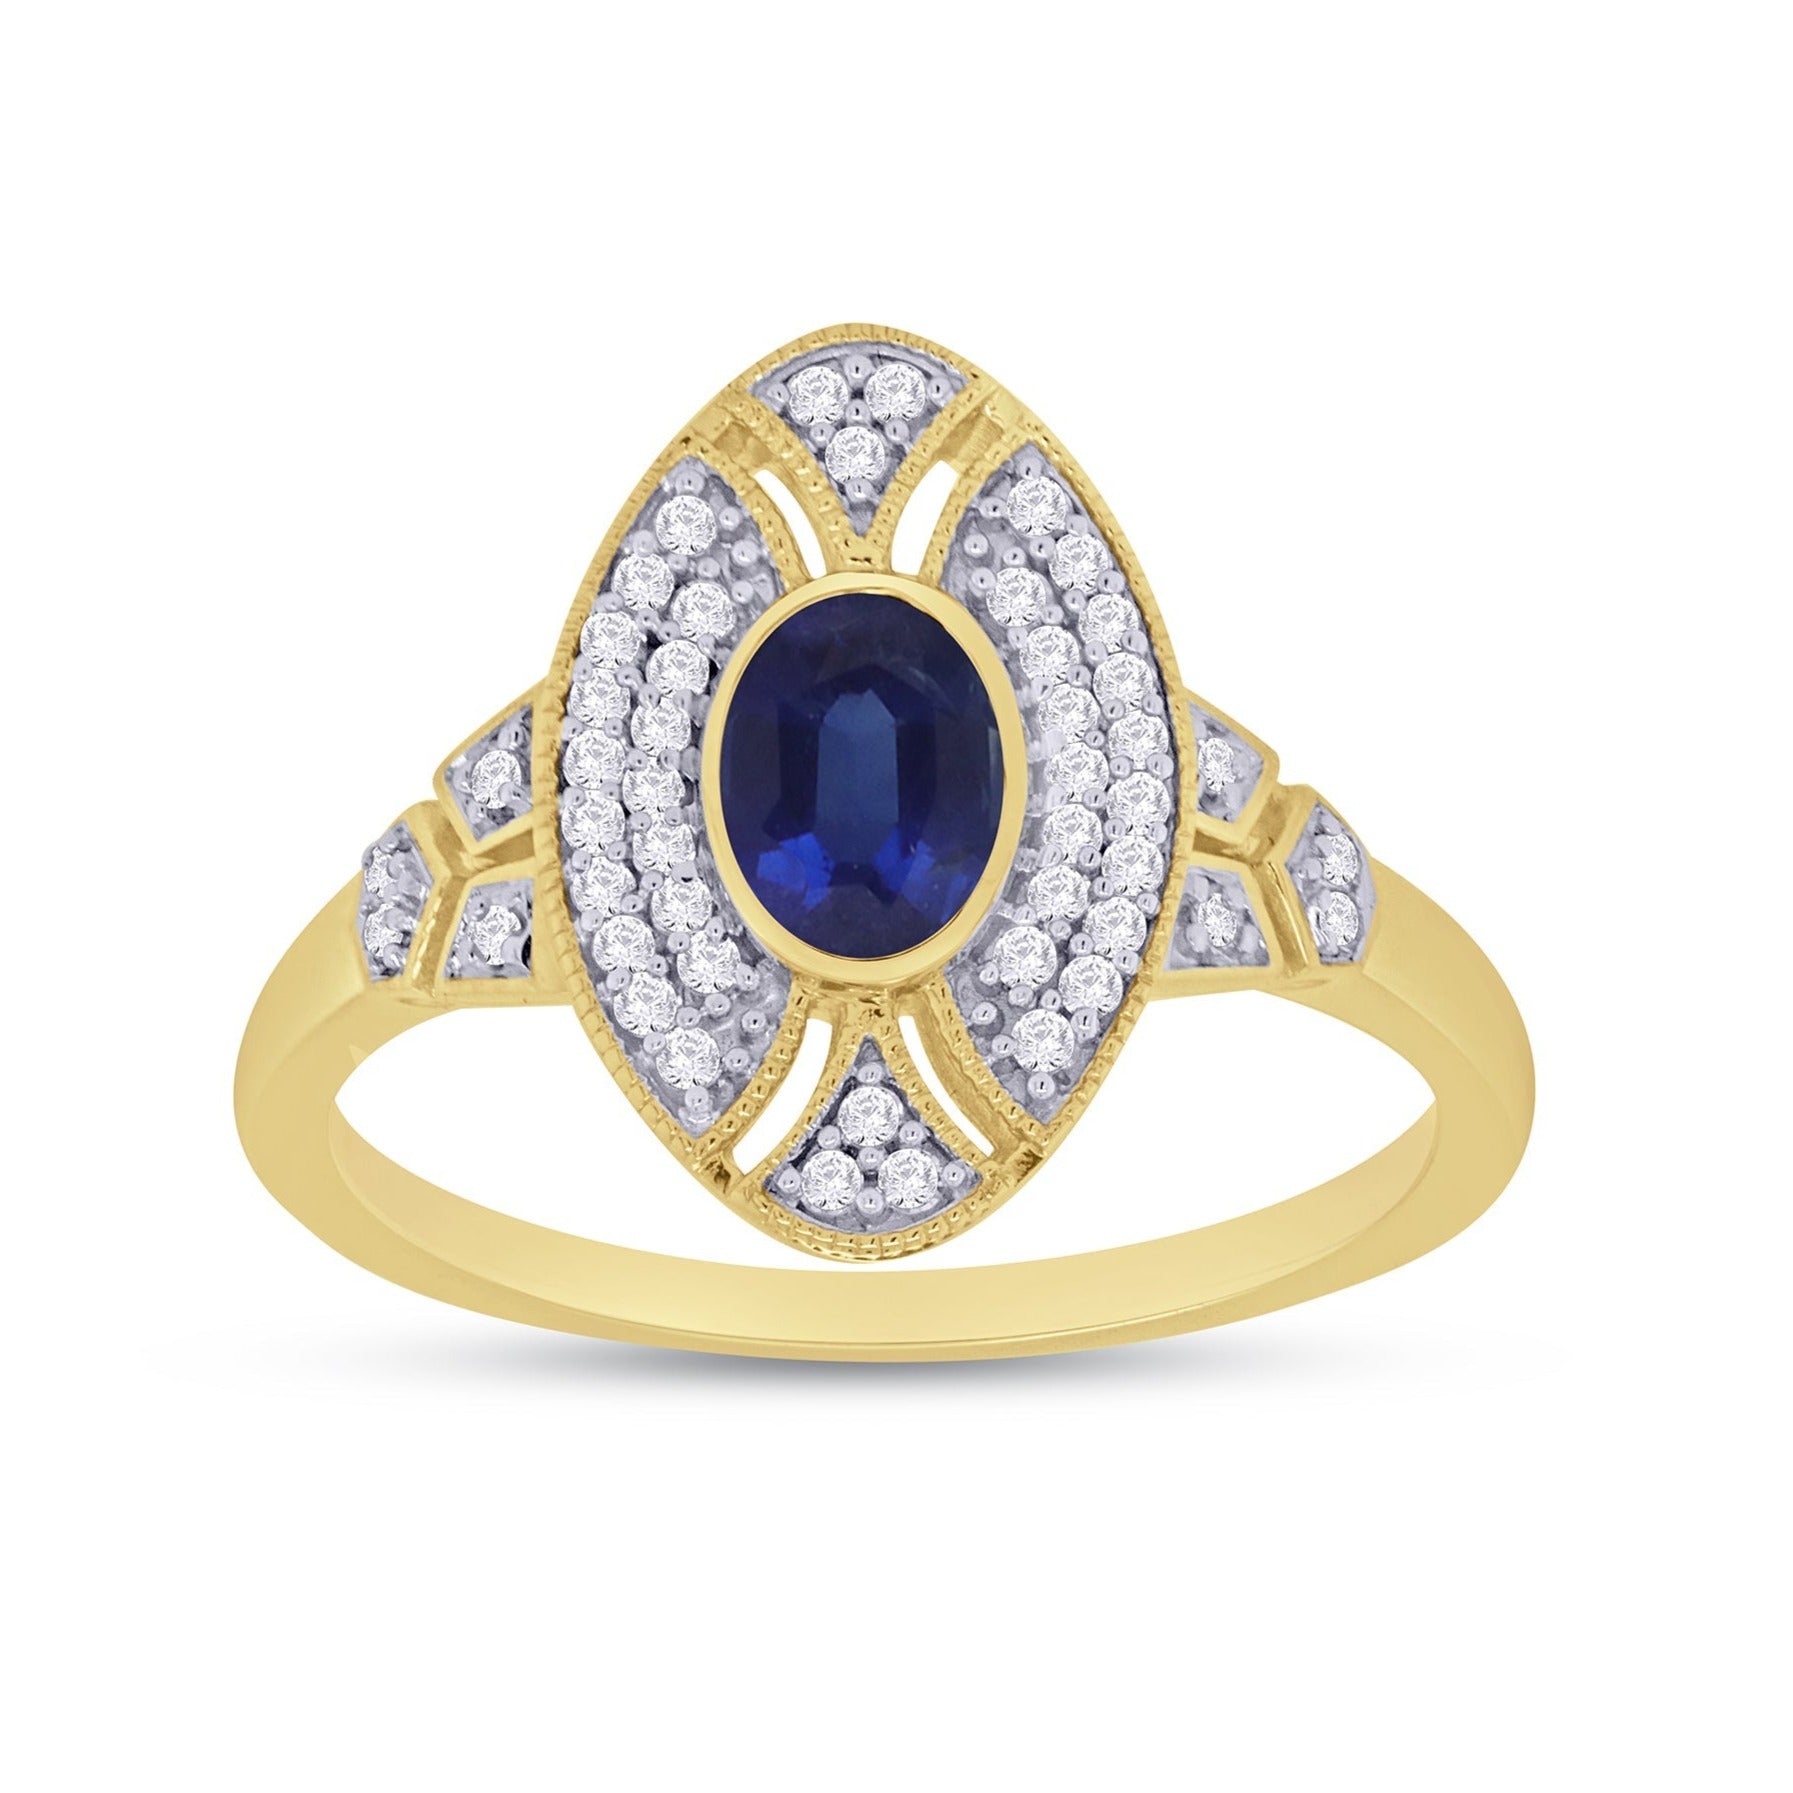 9ct gold 6x4mm oval sapphire & antique style diamond cluster ring 0.18ct